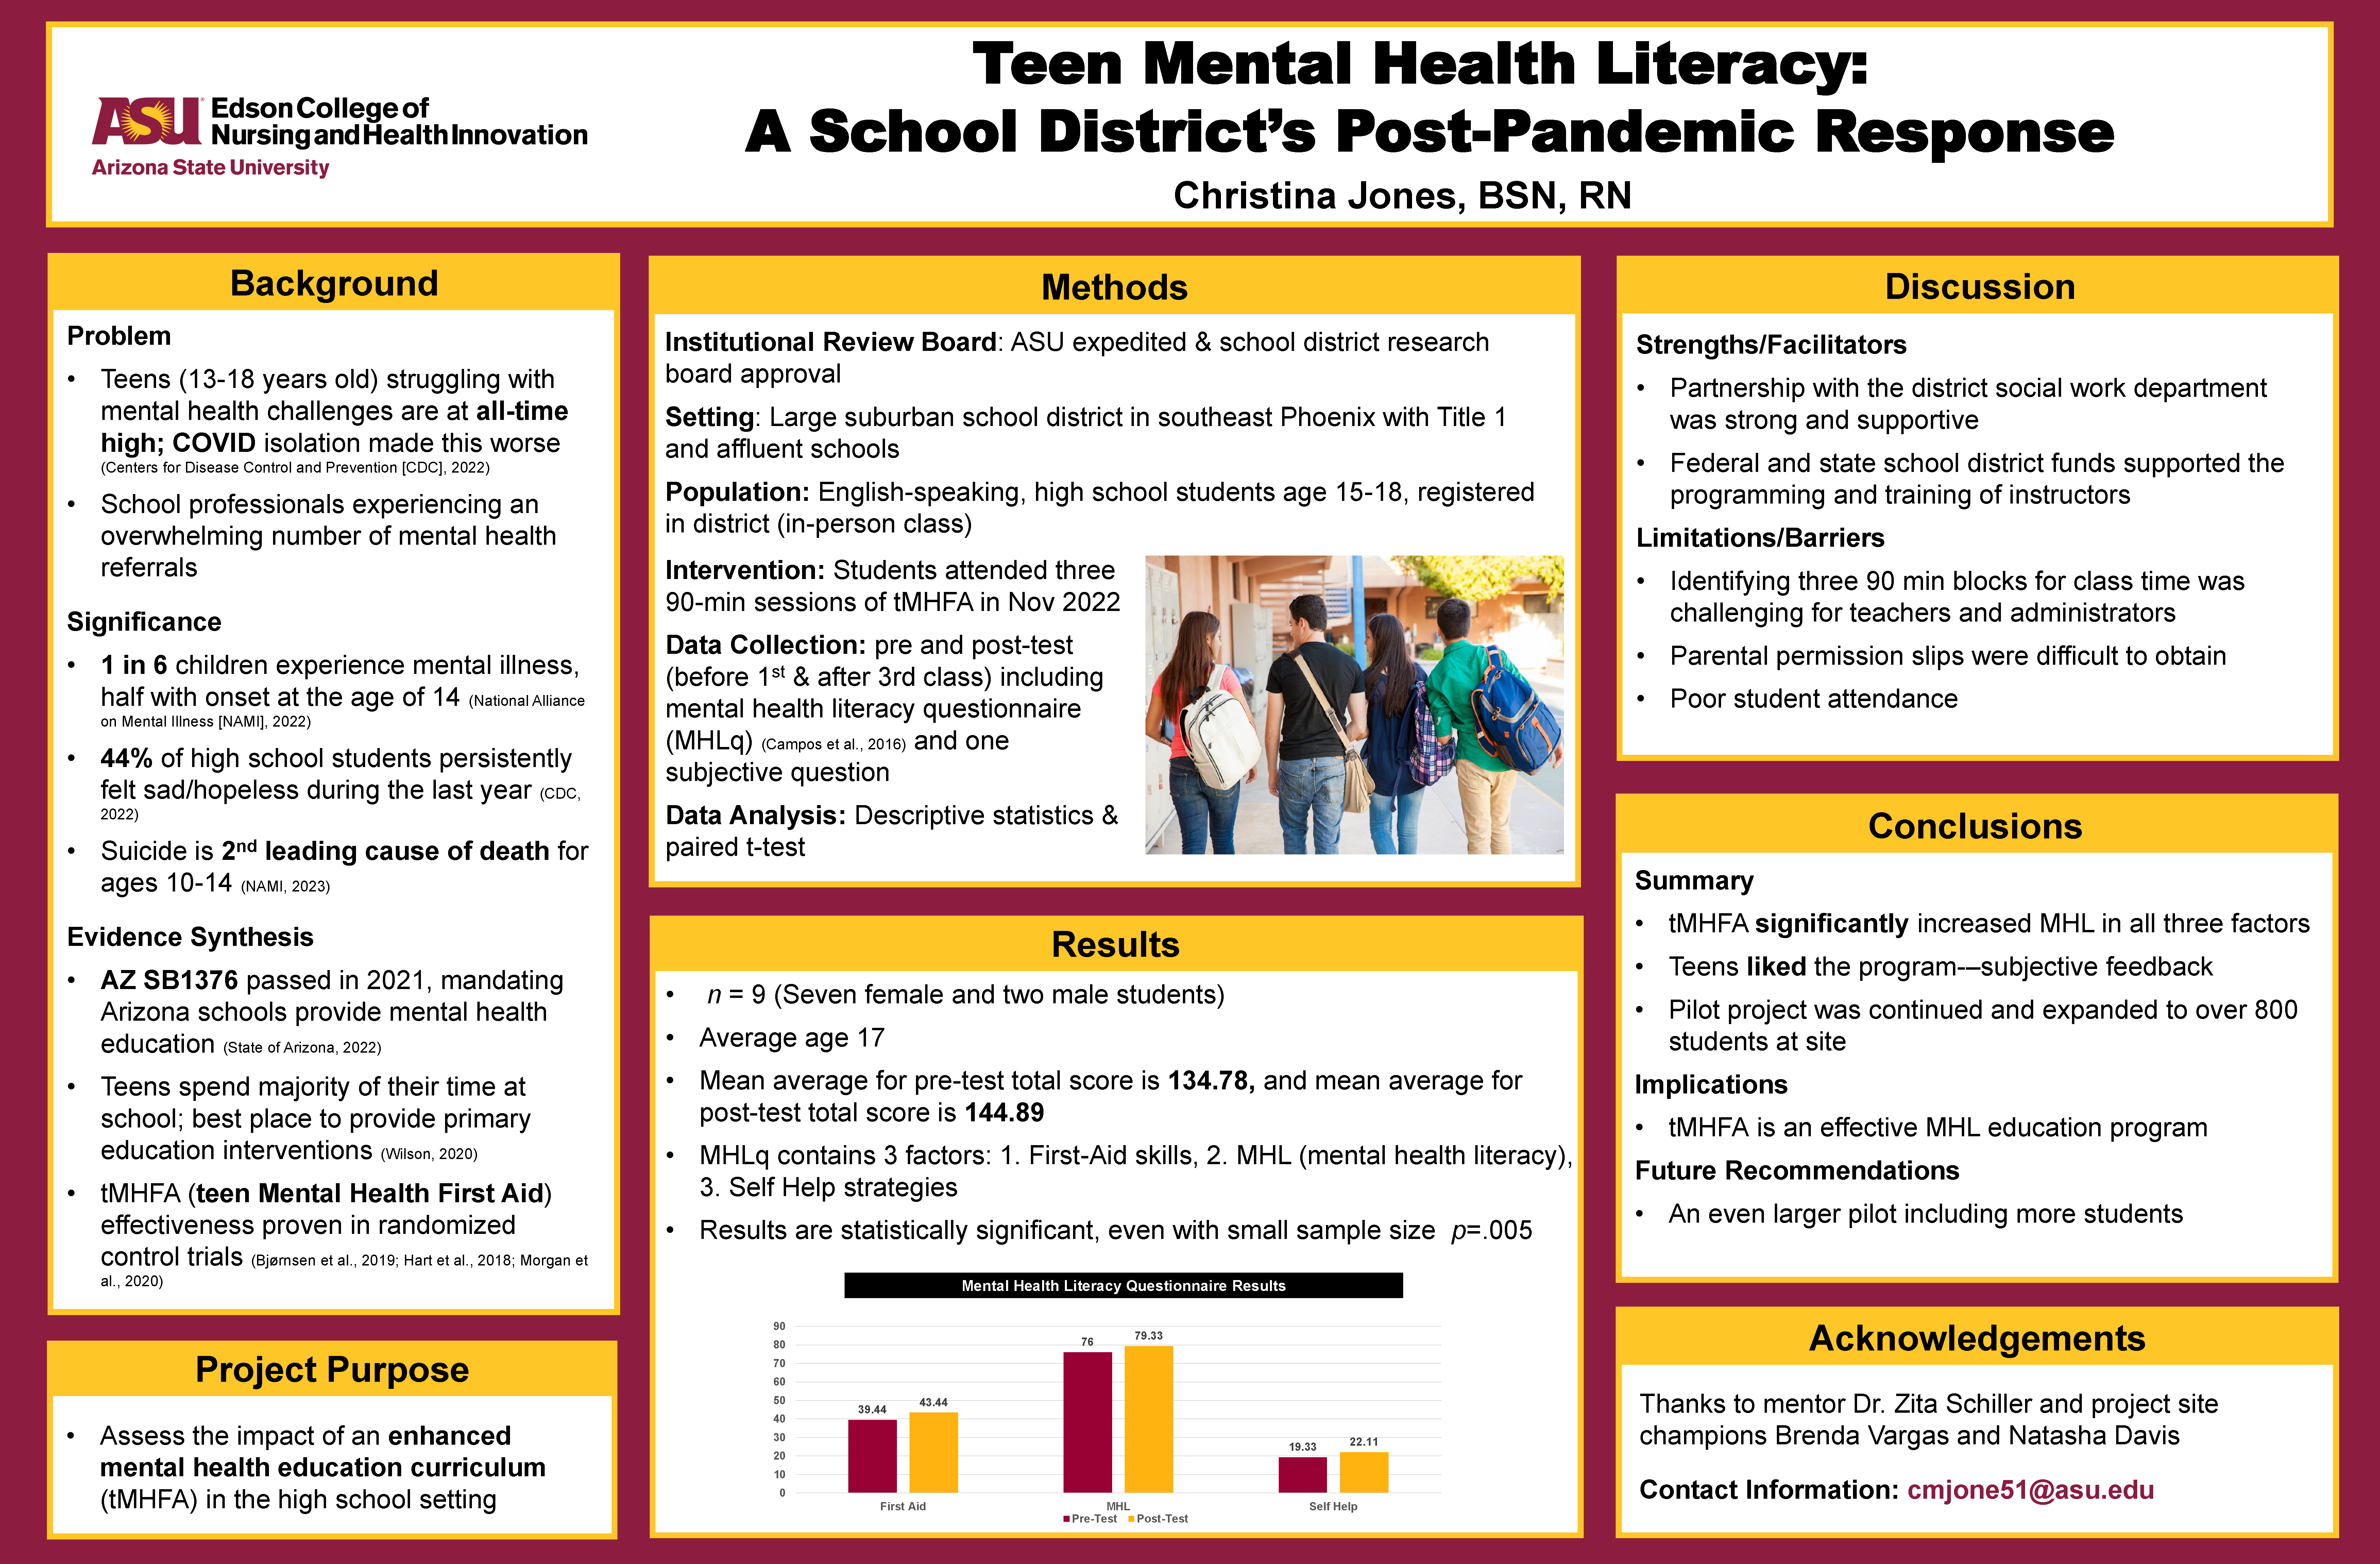 Teen Mental Healthy Literacy: a school district's post-pandemic response poster